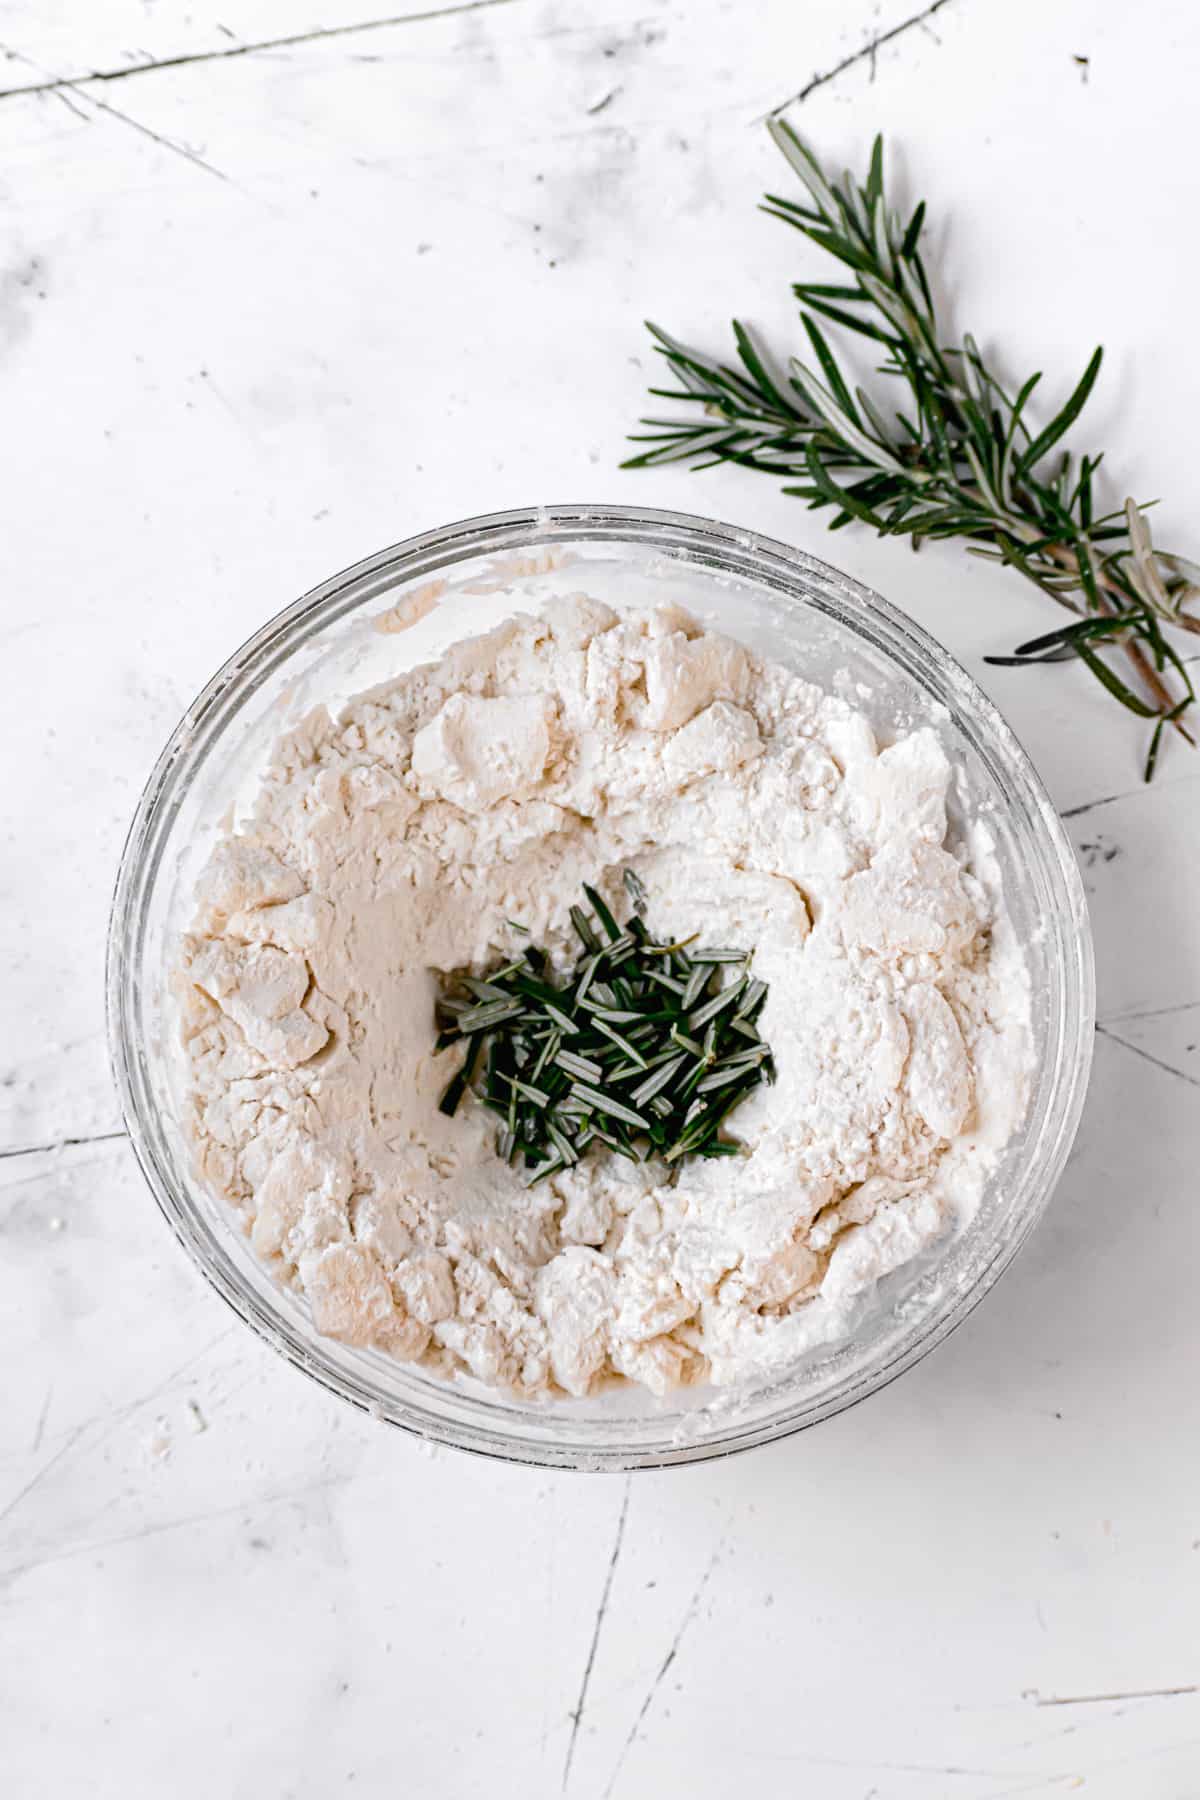 butter properly cut into the flour with rosemary in the center.